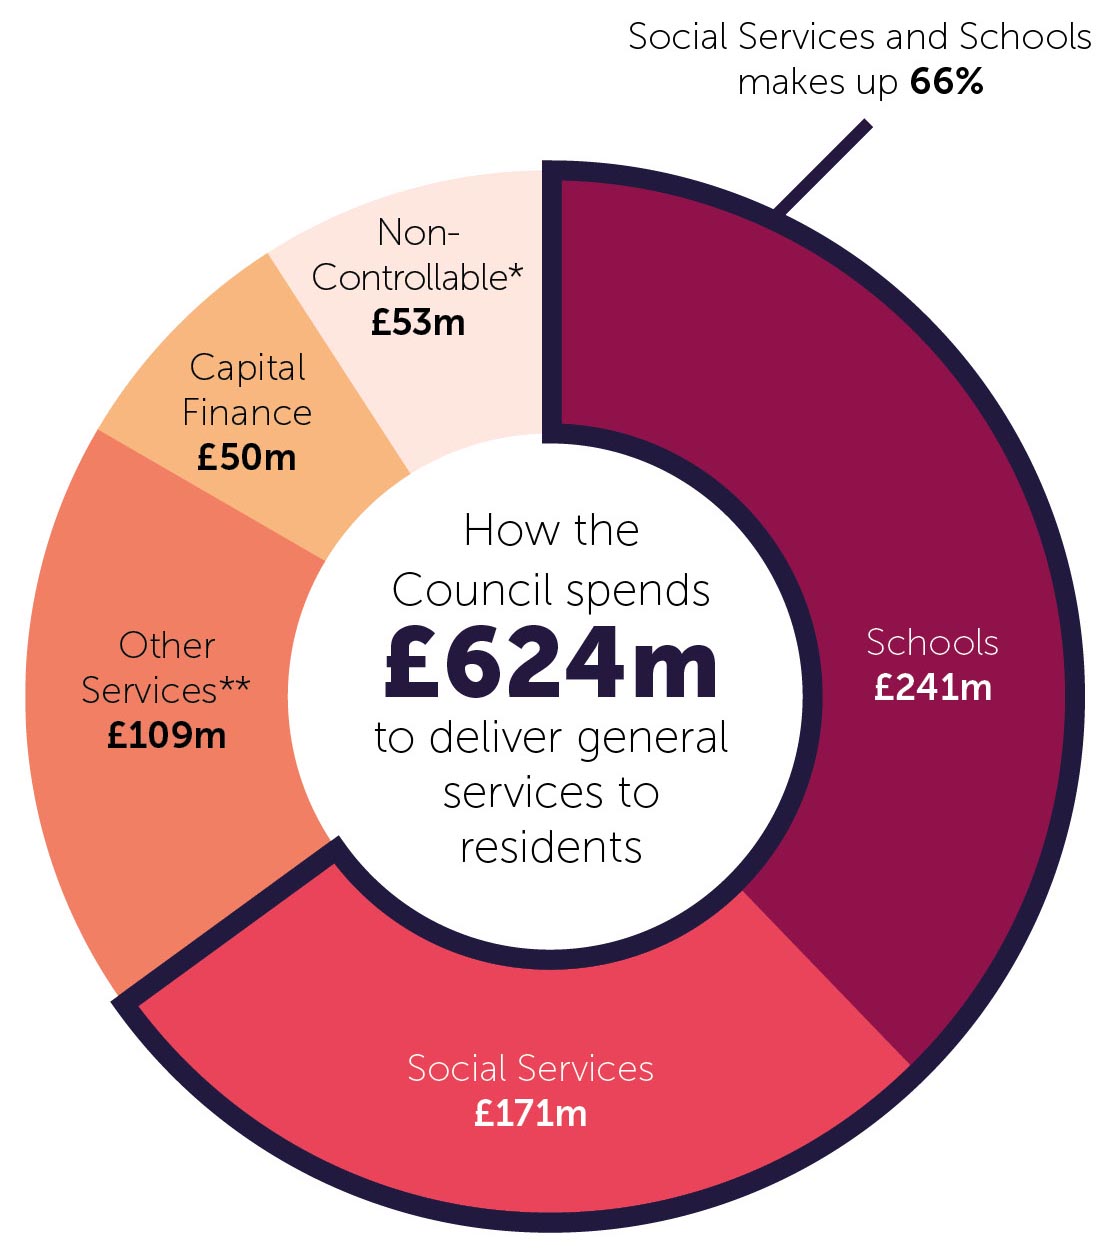 Chart showing how the council spends £624m to deliver services